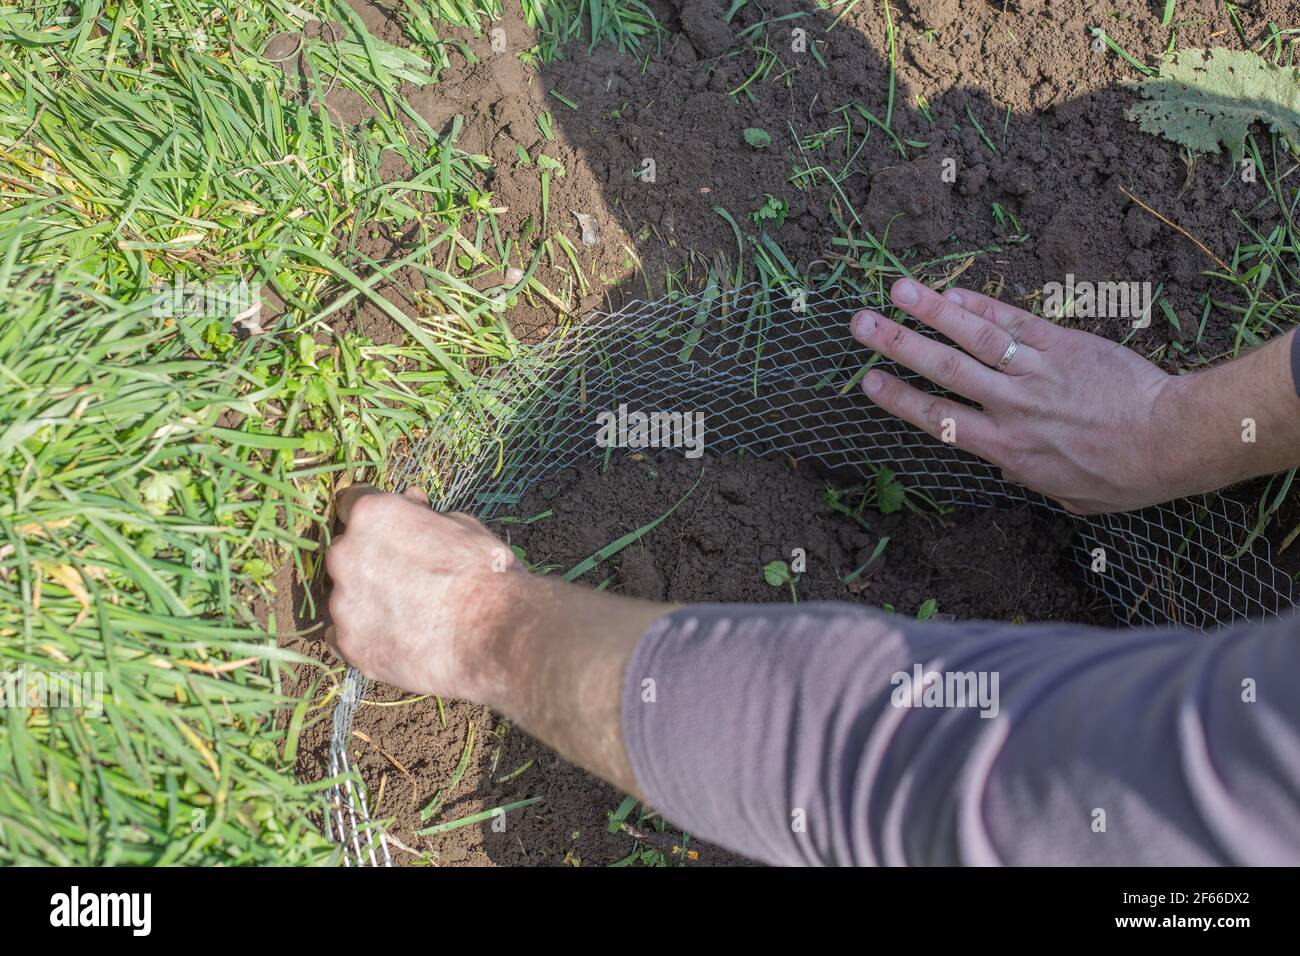 In the hole for planting a fruit tree, the man inserts a reinforced metal mesh to protect its roots from moles. Stock Photo